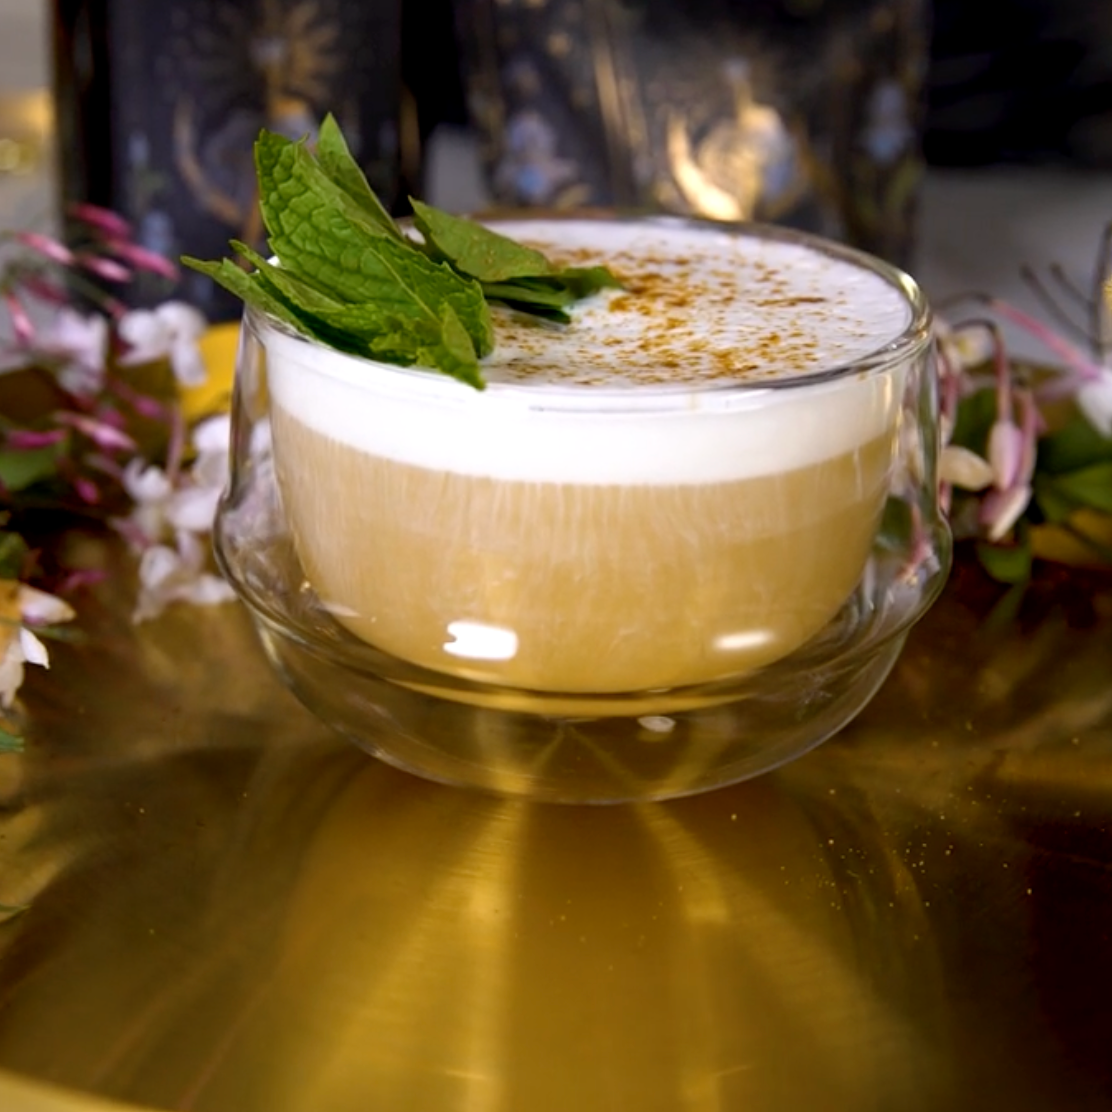 A glass cup filled with The High Priestess: Wisdom Tea for Powerful Dreams &amp; Illuminated Insights by Magic Hour, garnished with fresh mint leaves on top, sits on a golden surface. In the background, there are floral elements and ornate black and gold decorative items.